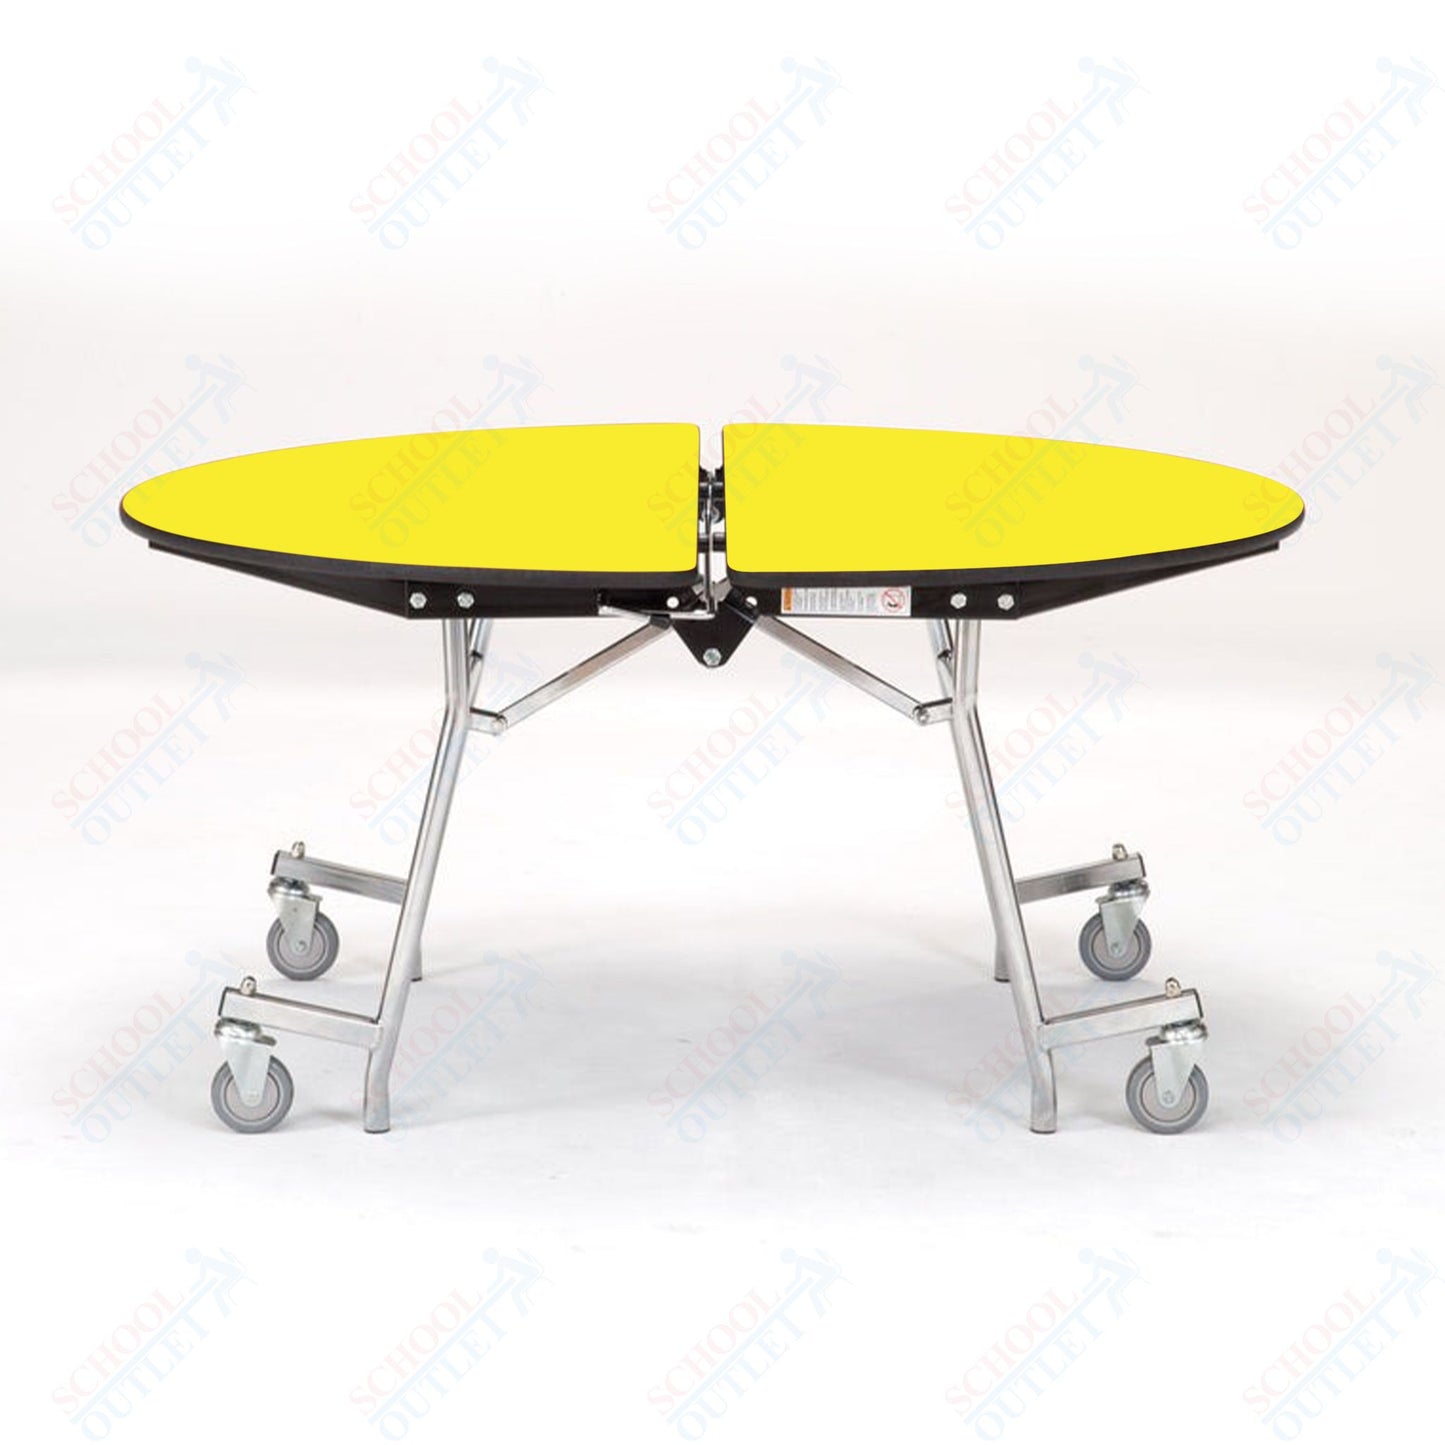 NPS Mobile Cafeteria Round Table Shape Unit - 72" W x 72" L (National Public Seating NPS-MT72R)